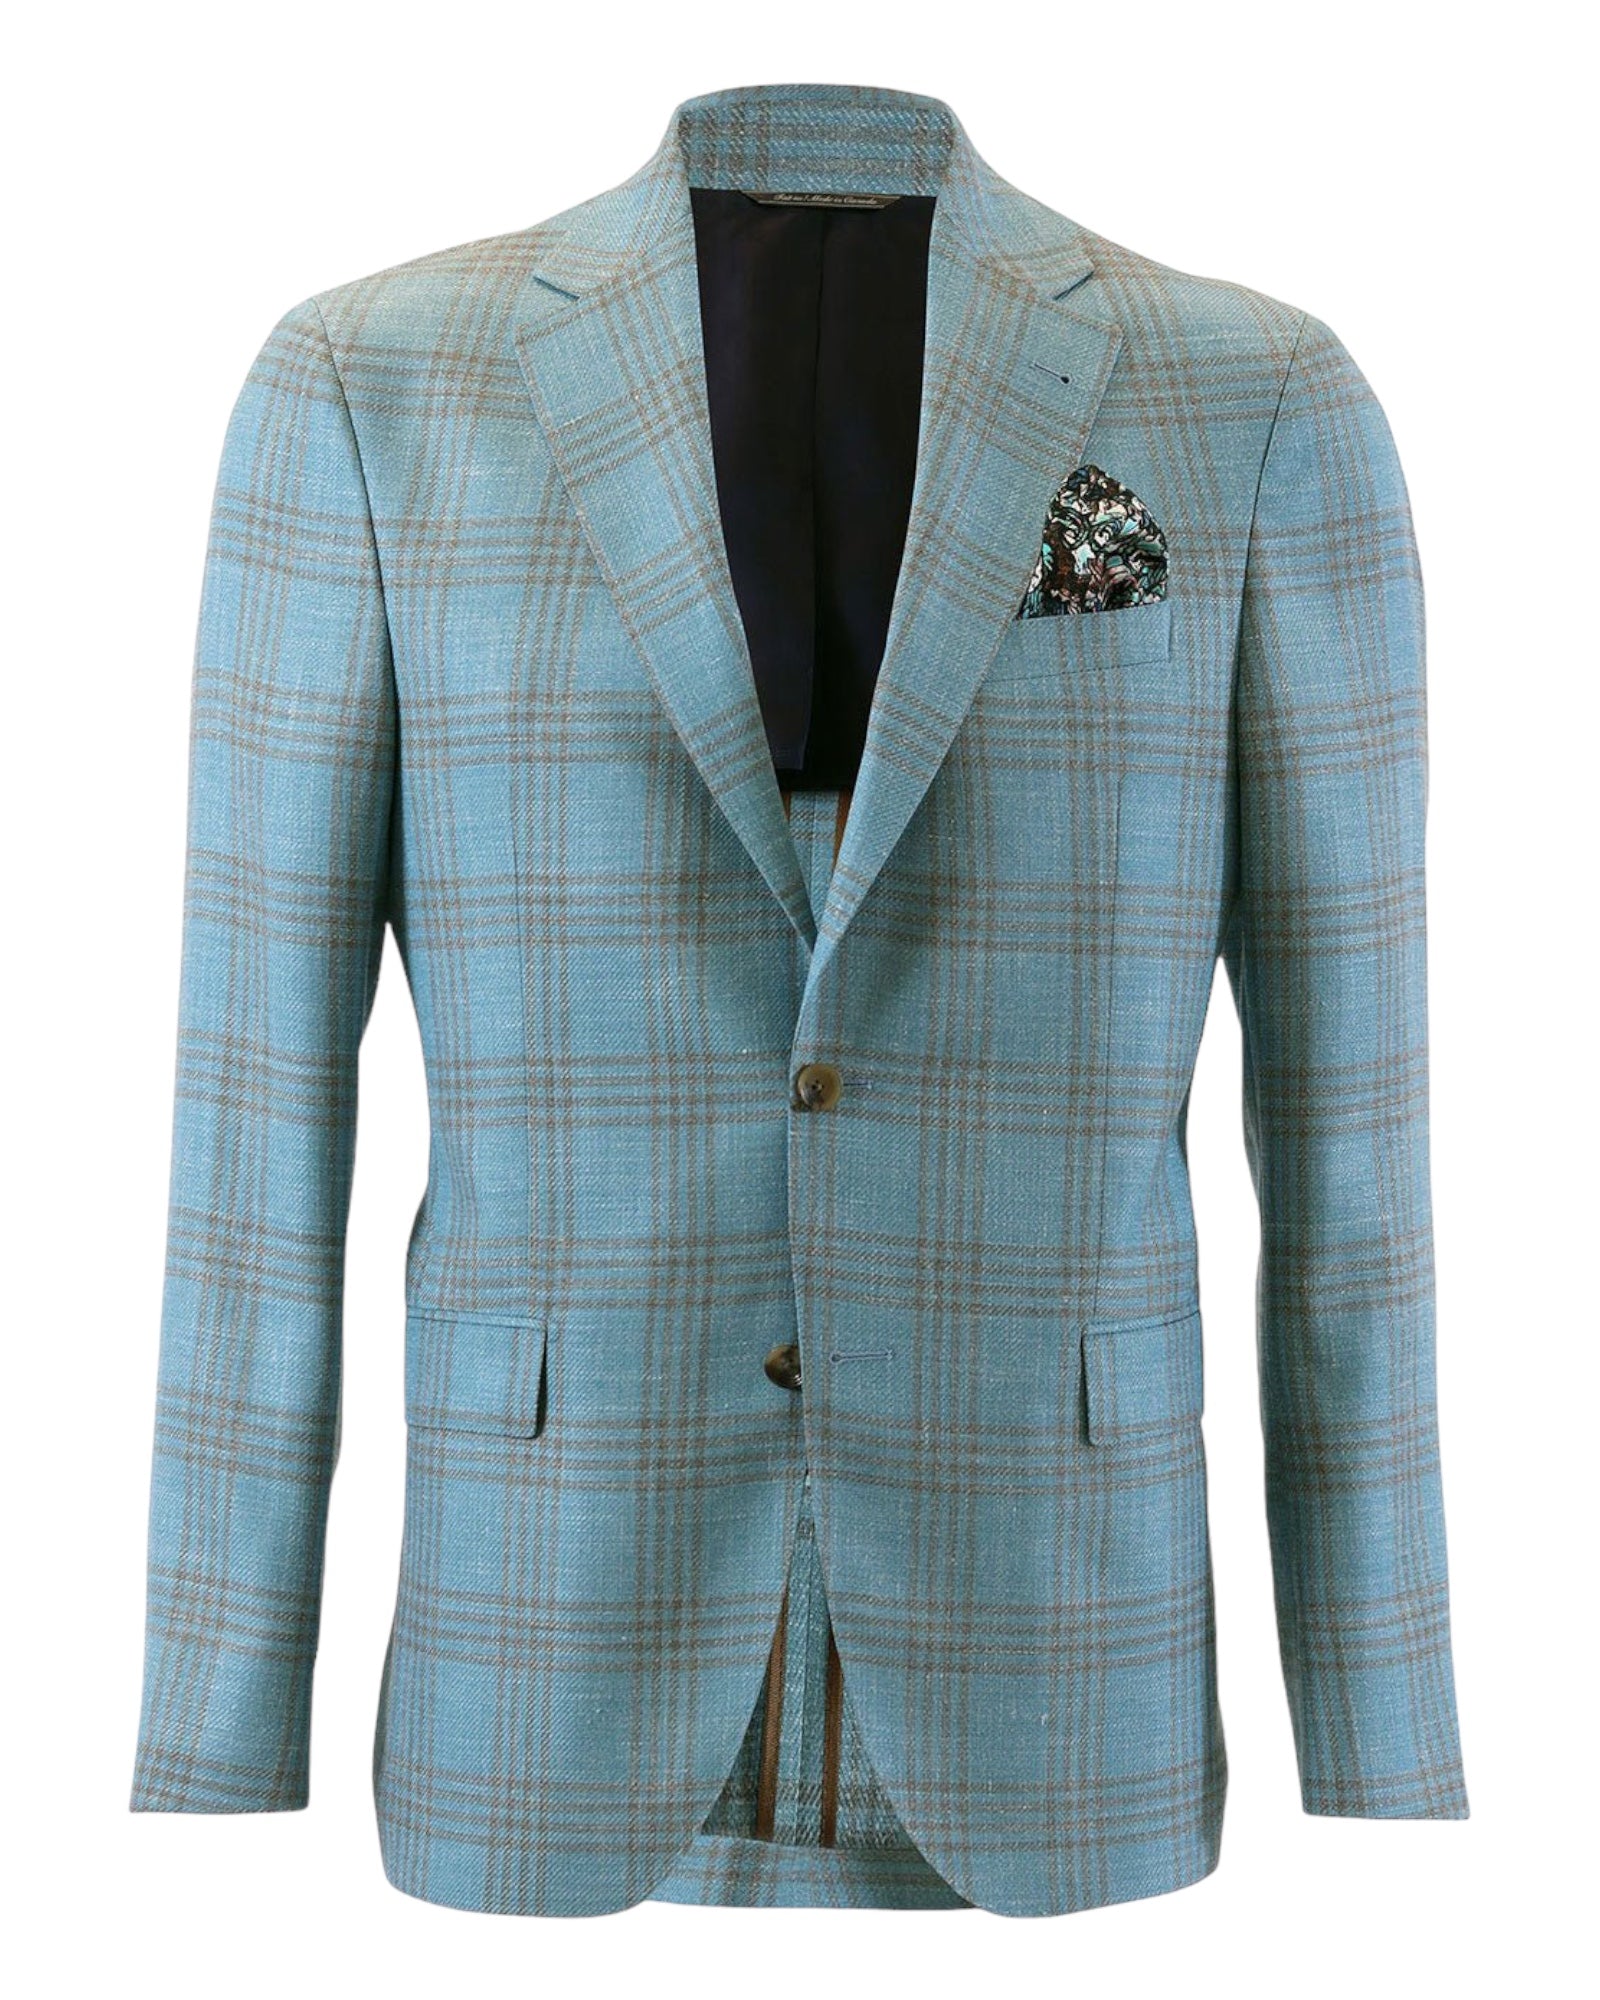 Jacket - Light Blue with Taupe Glen Check JACKETS40R